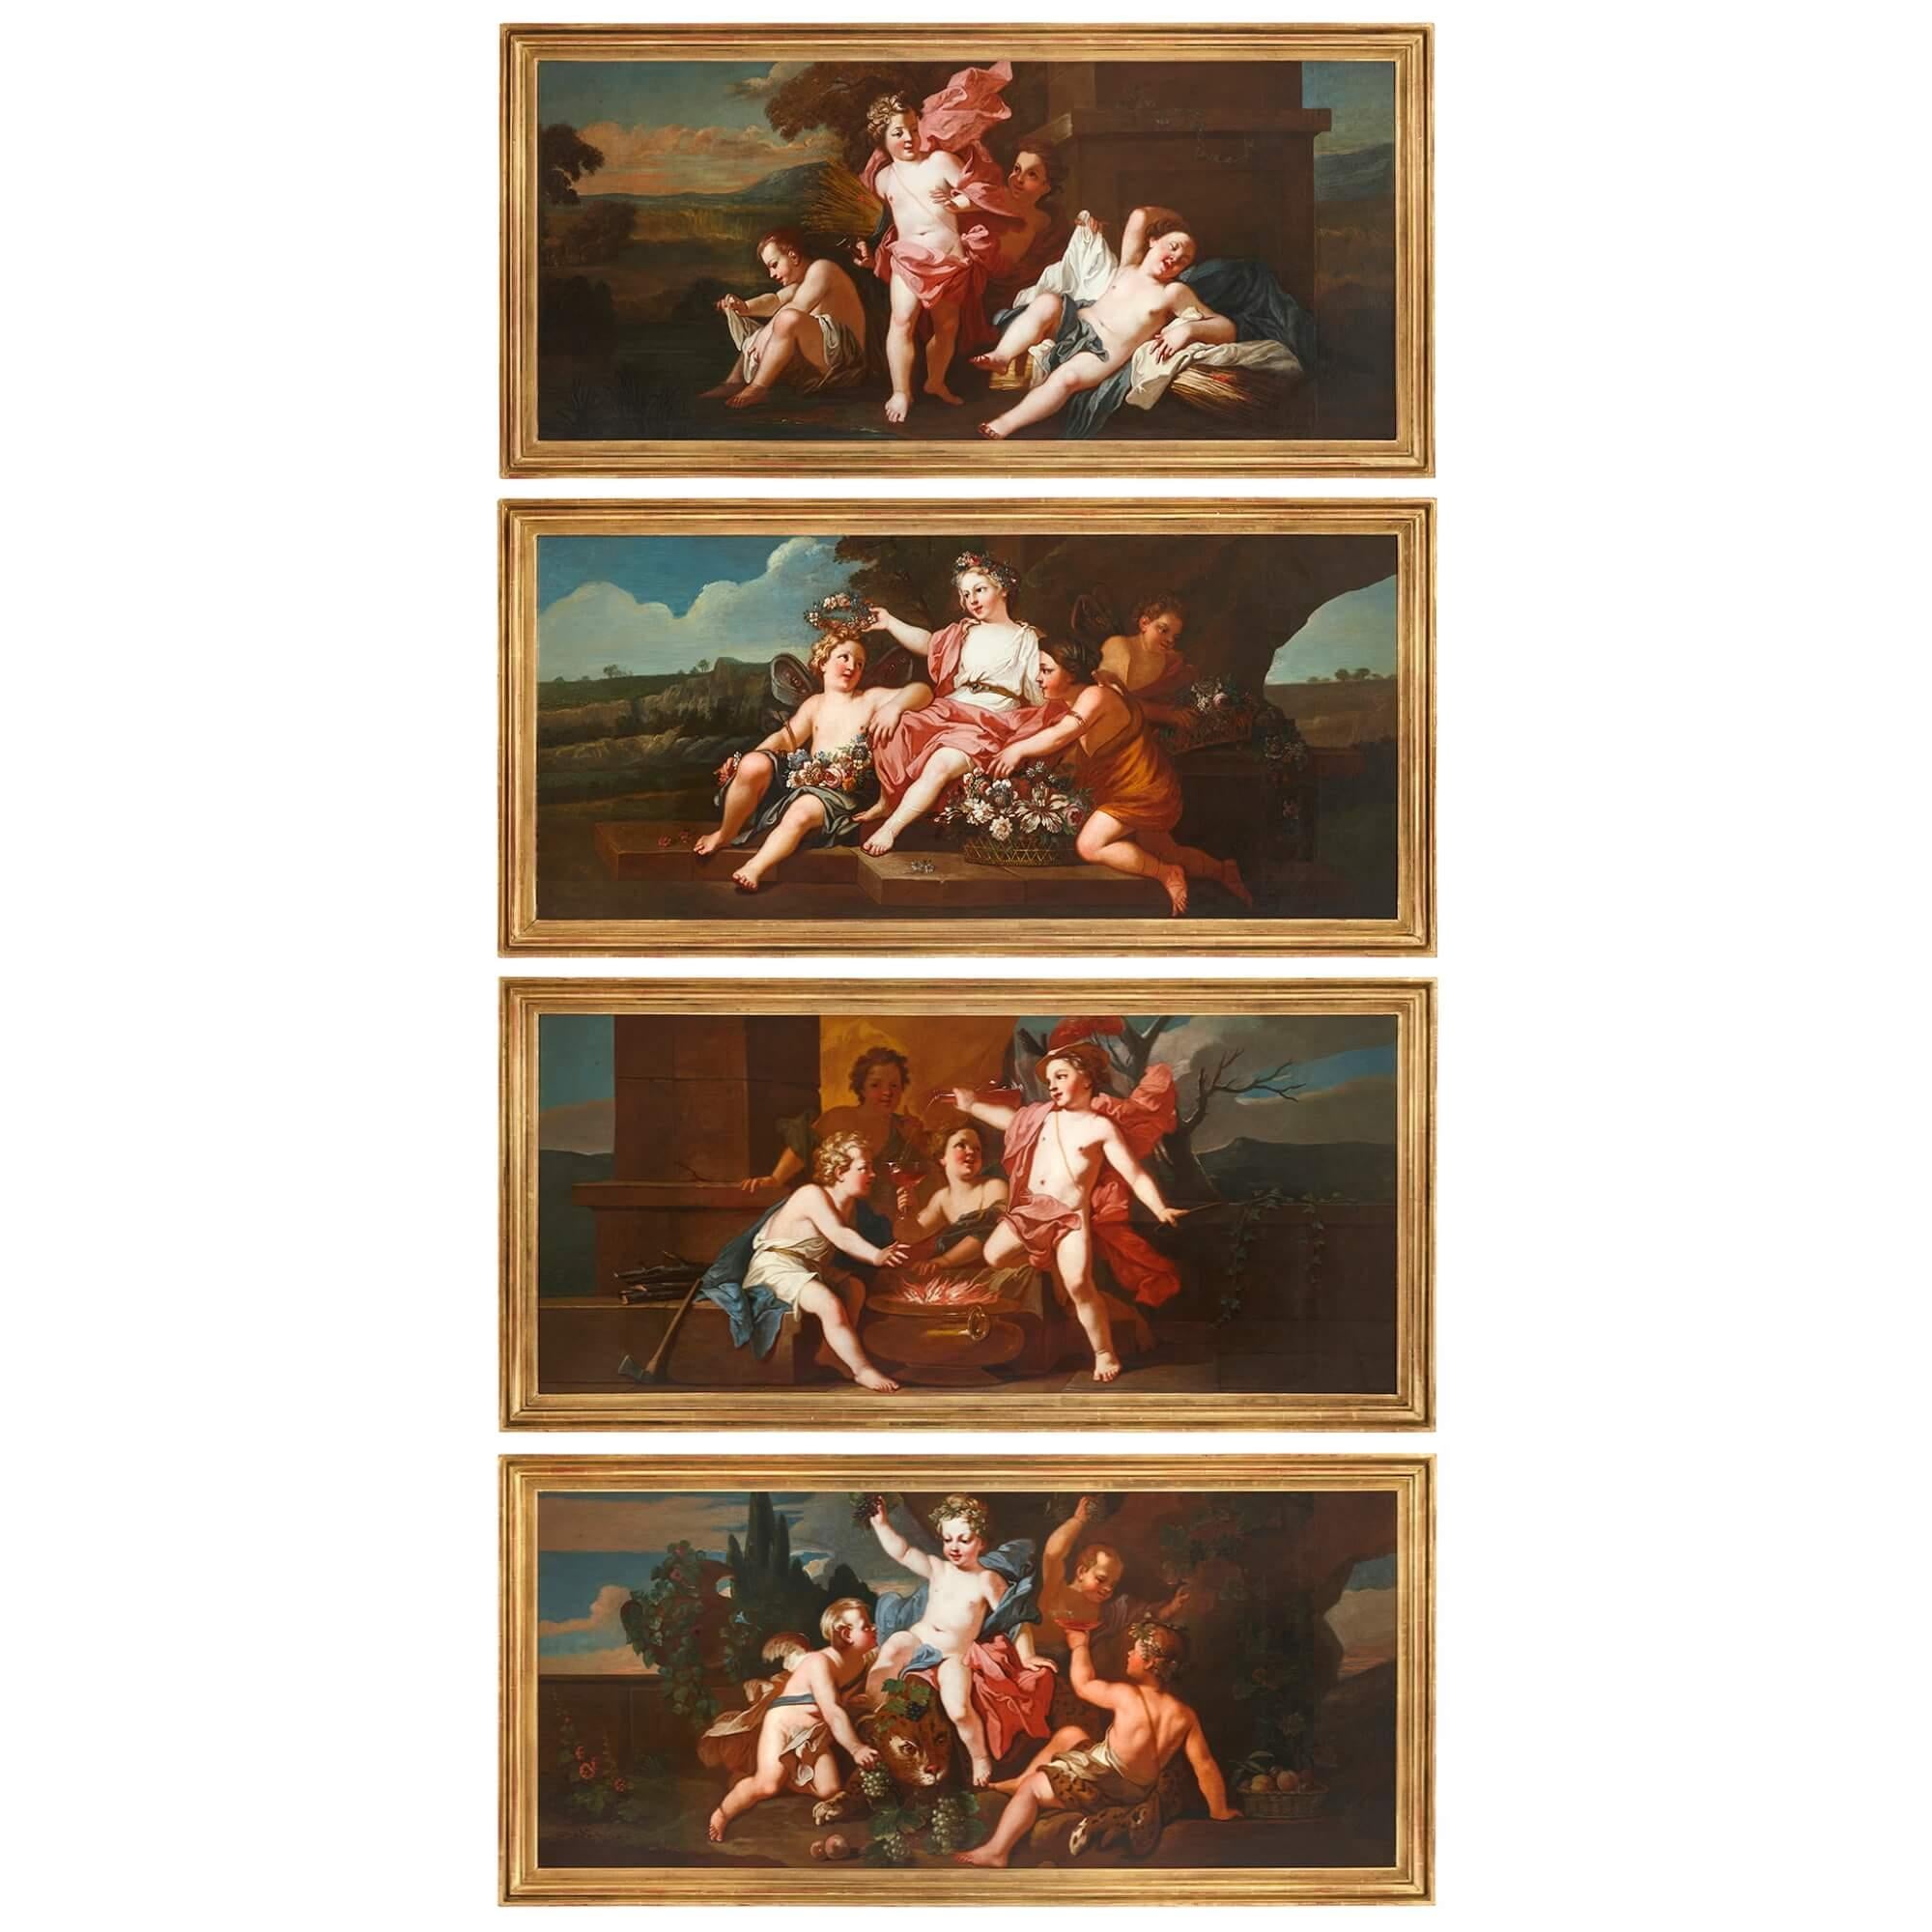 Unknown Figurative Painting - Set of four very large 18th century Italian Rococo paintings of the Four Seasons